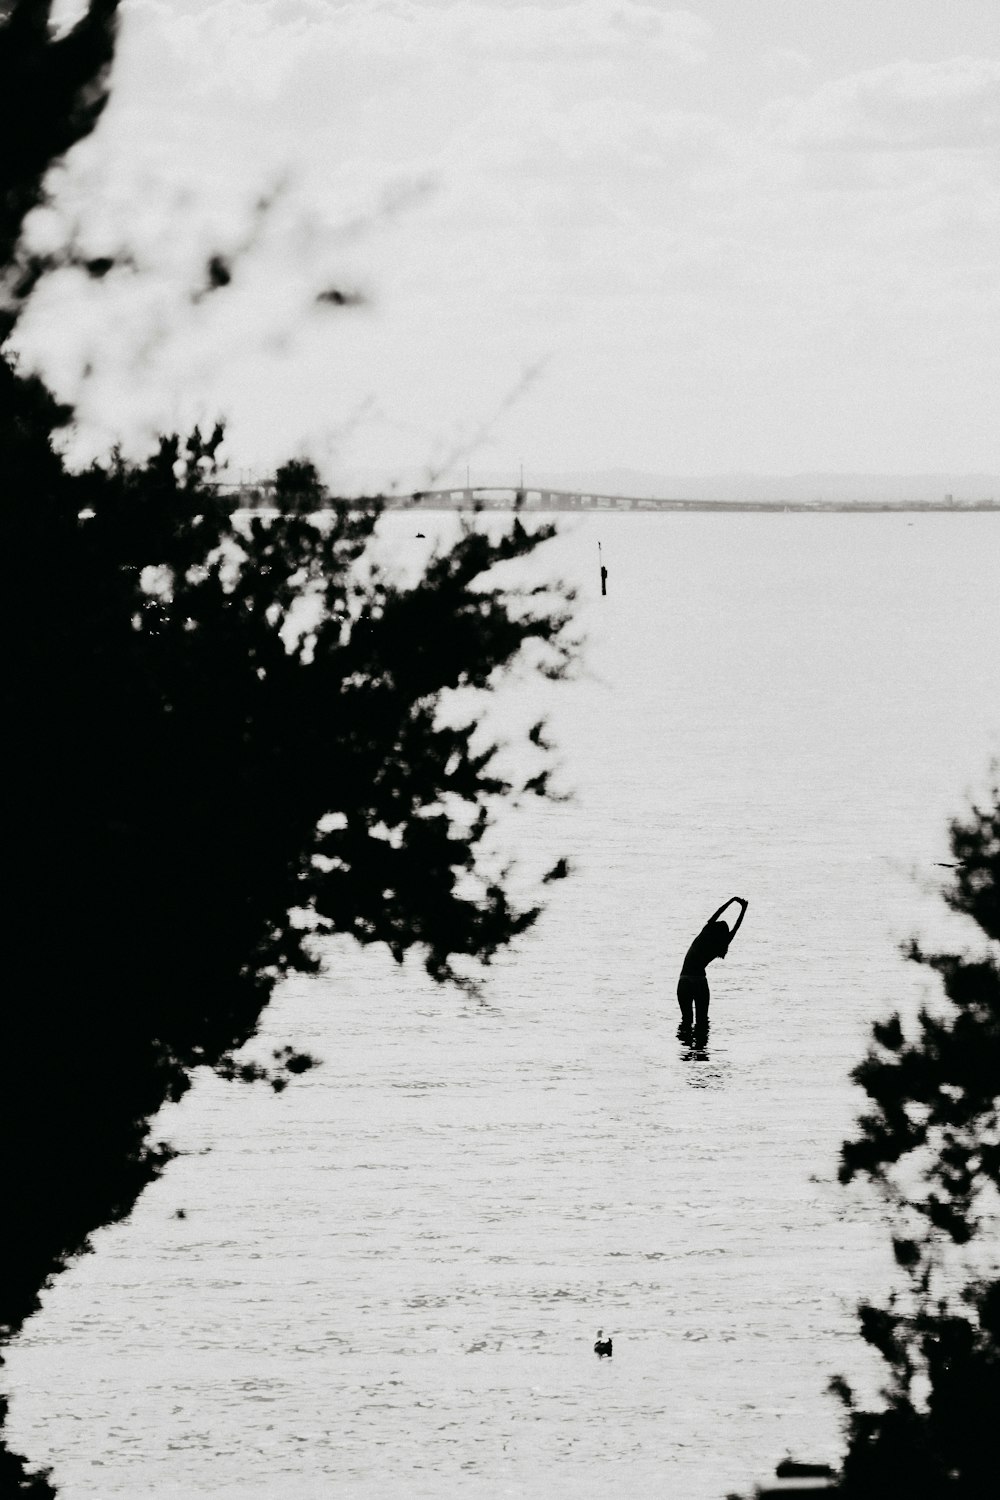 a person standing in a body of water with trees around it